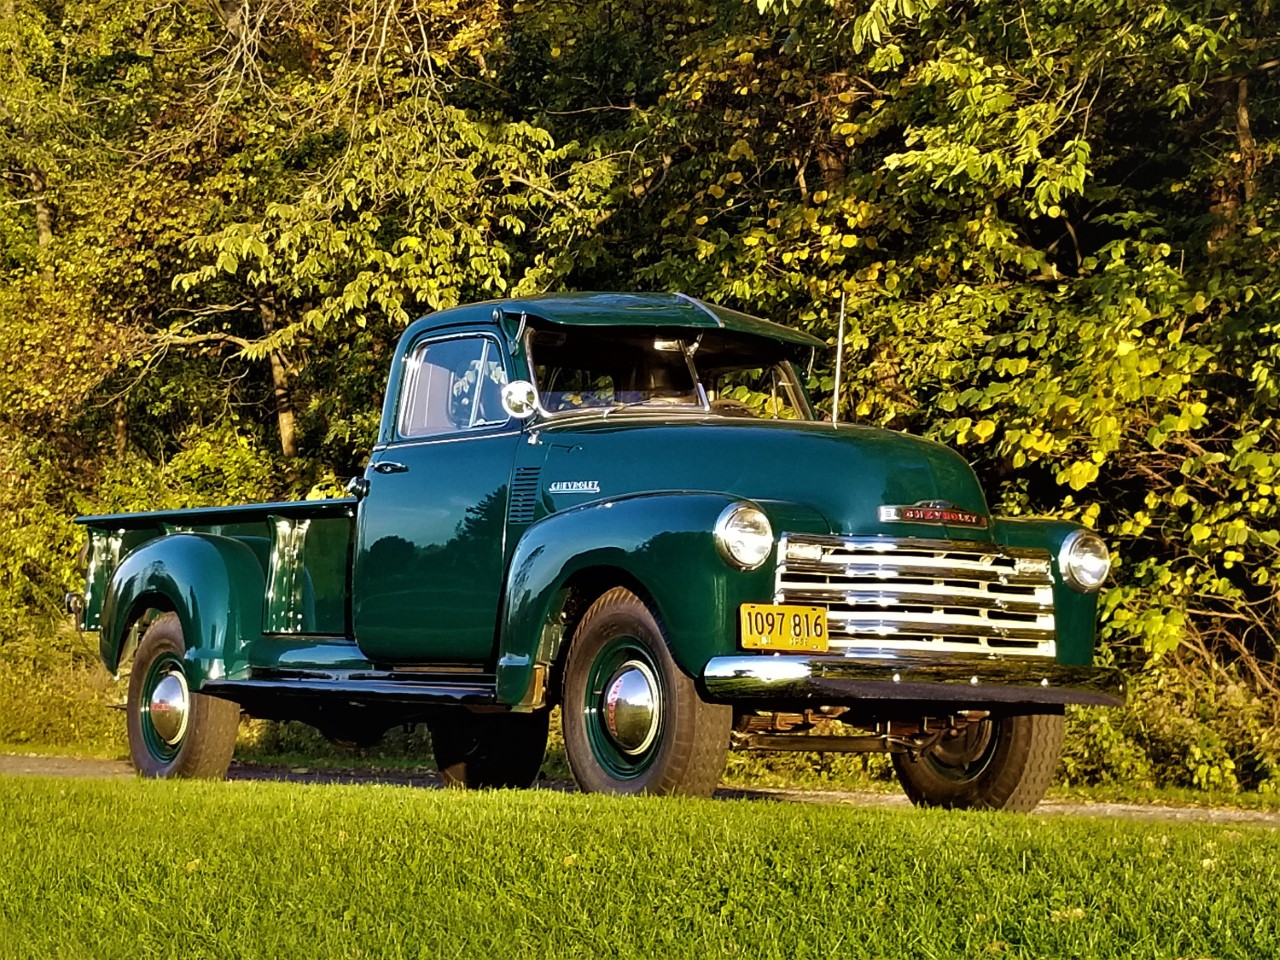 1952 Chevrolet 1 ton Pickup - 9 foot bed